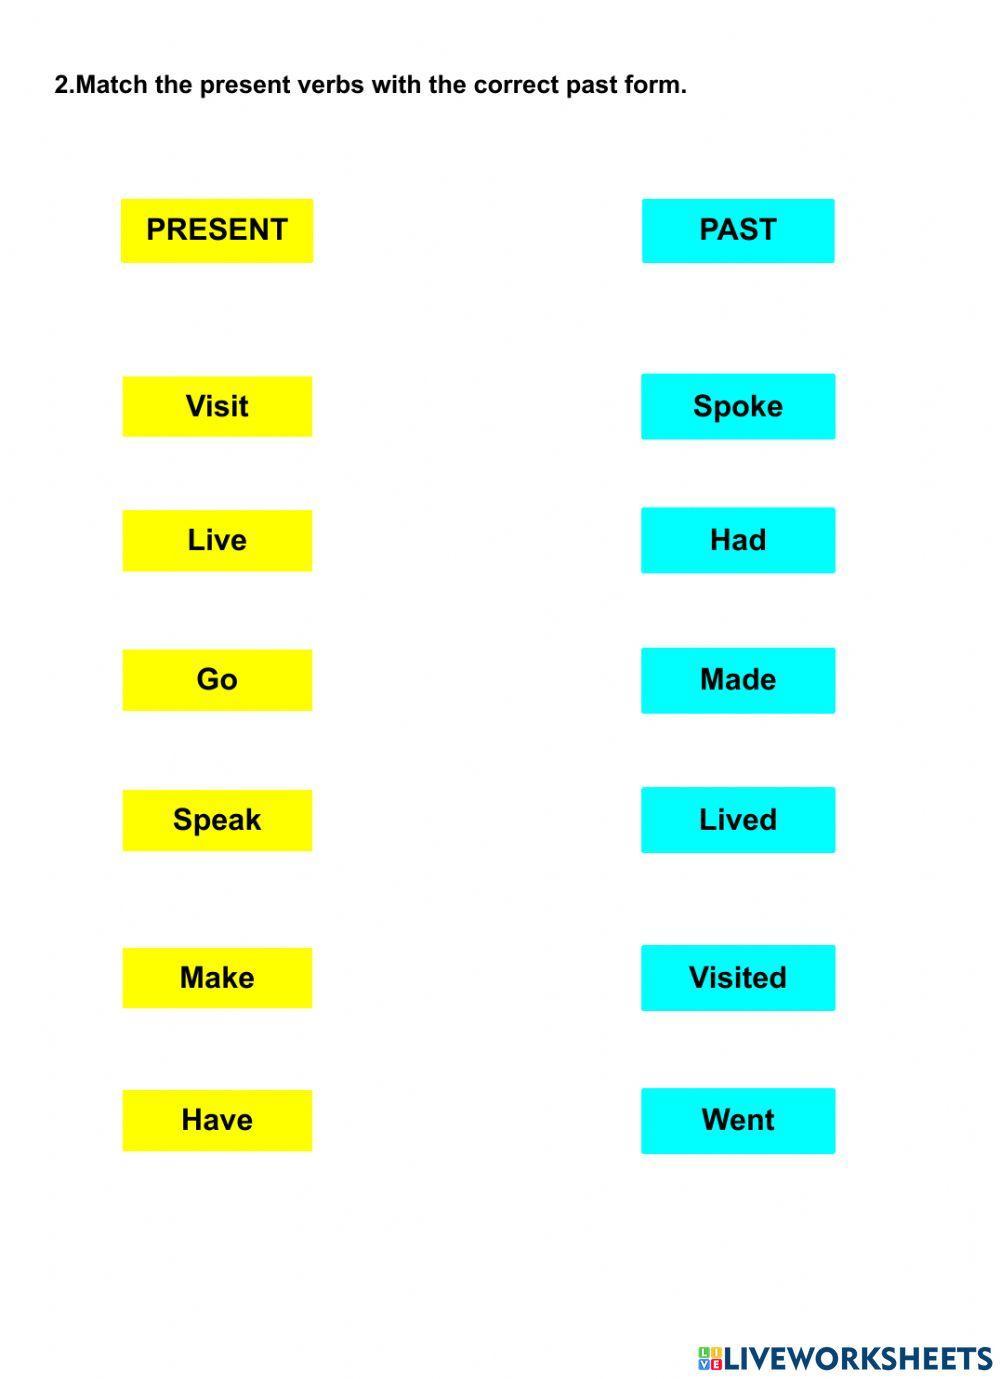 Verbs in past and present